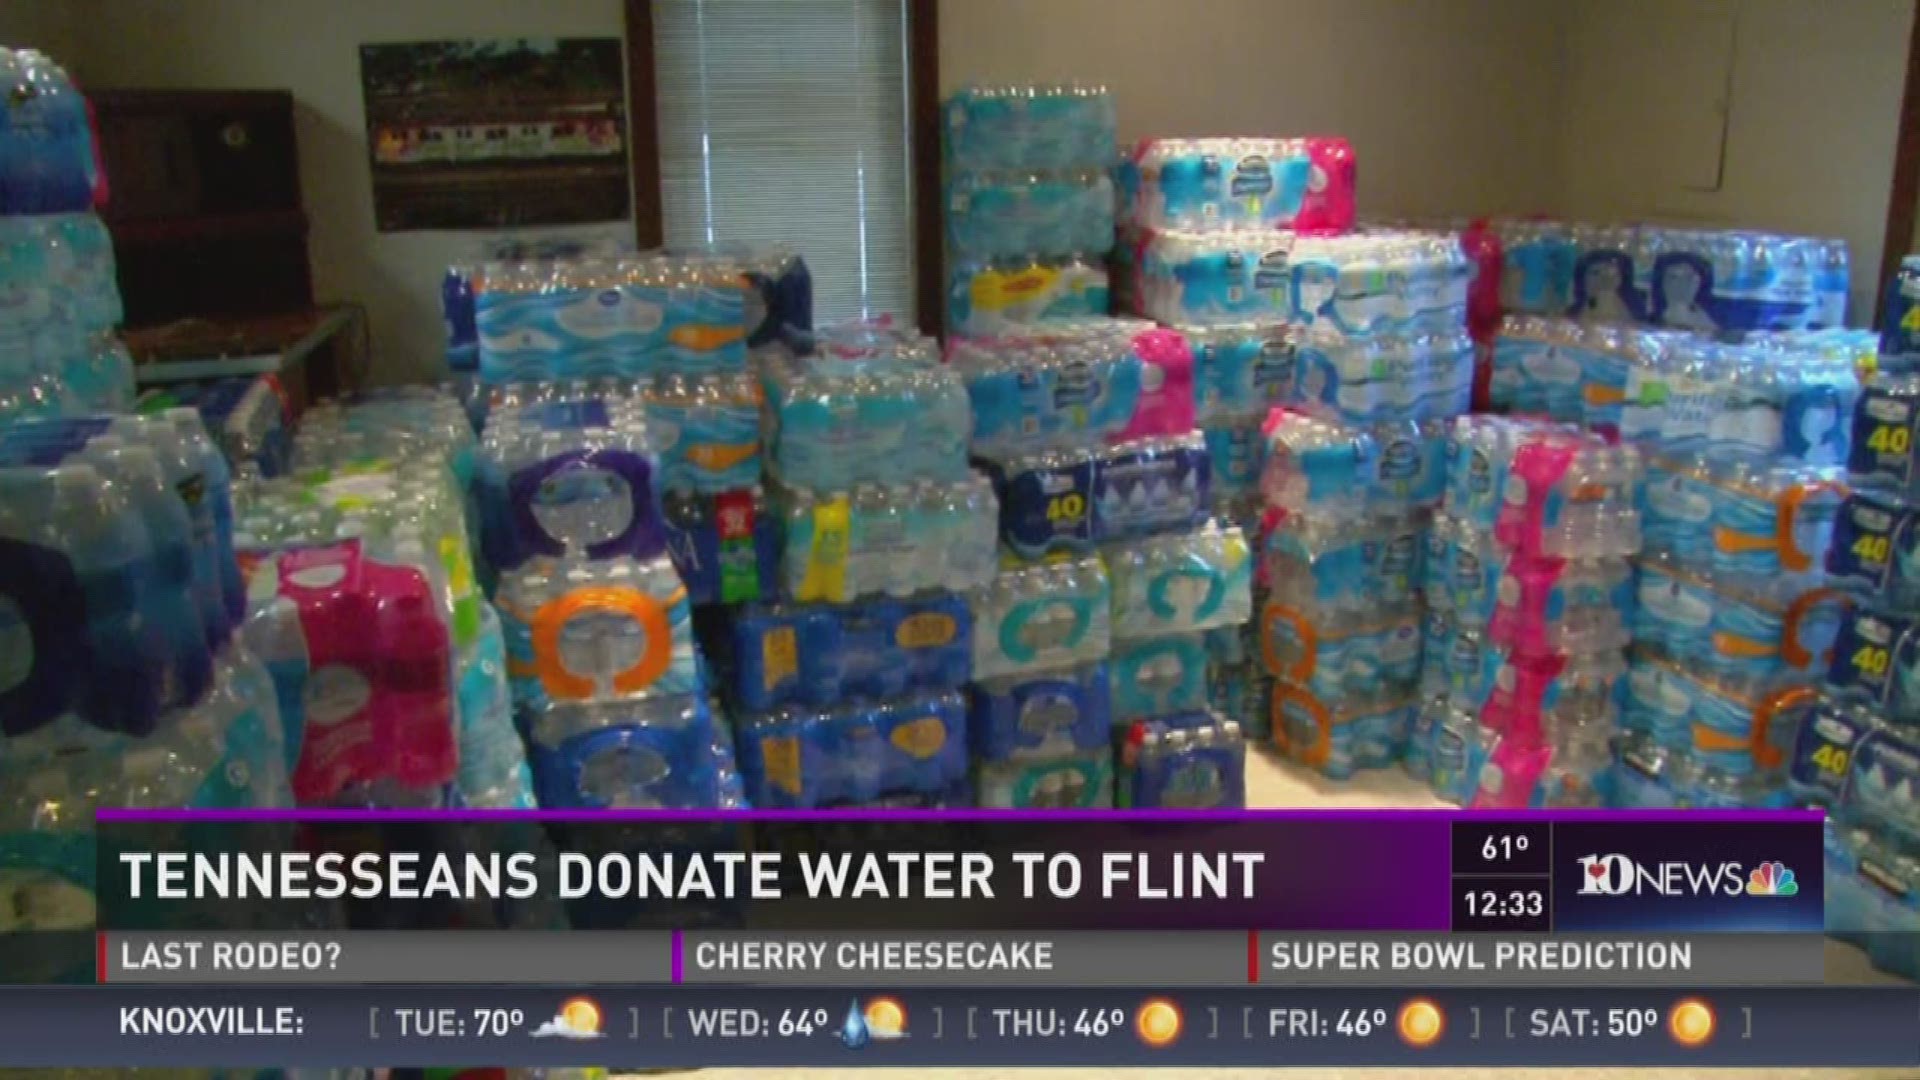 Use #TNWaterForFlint to share your donation to help those with contaminated water in Flint, Mich.